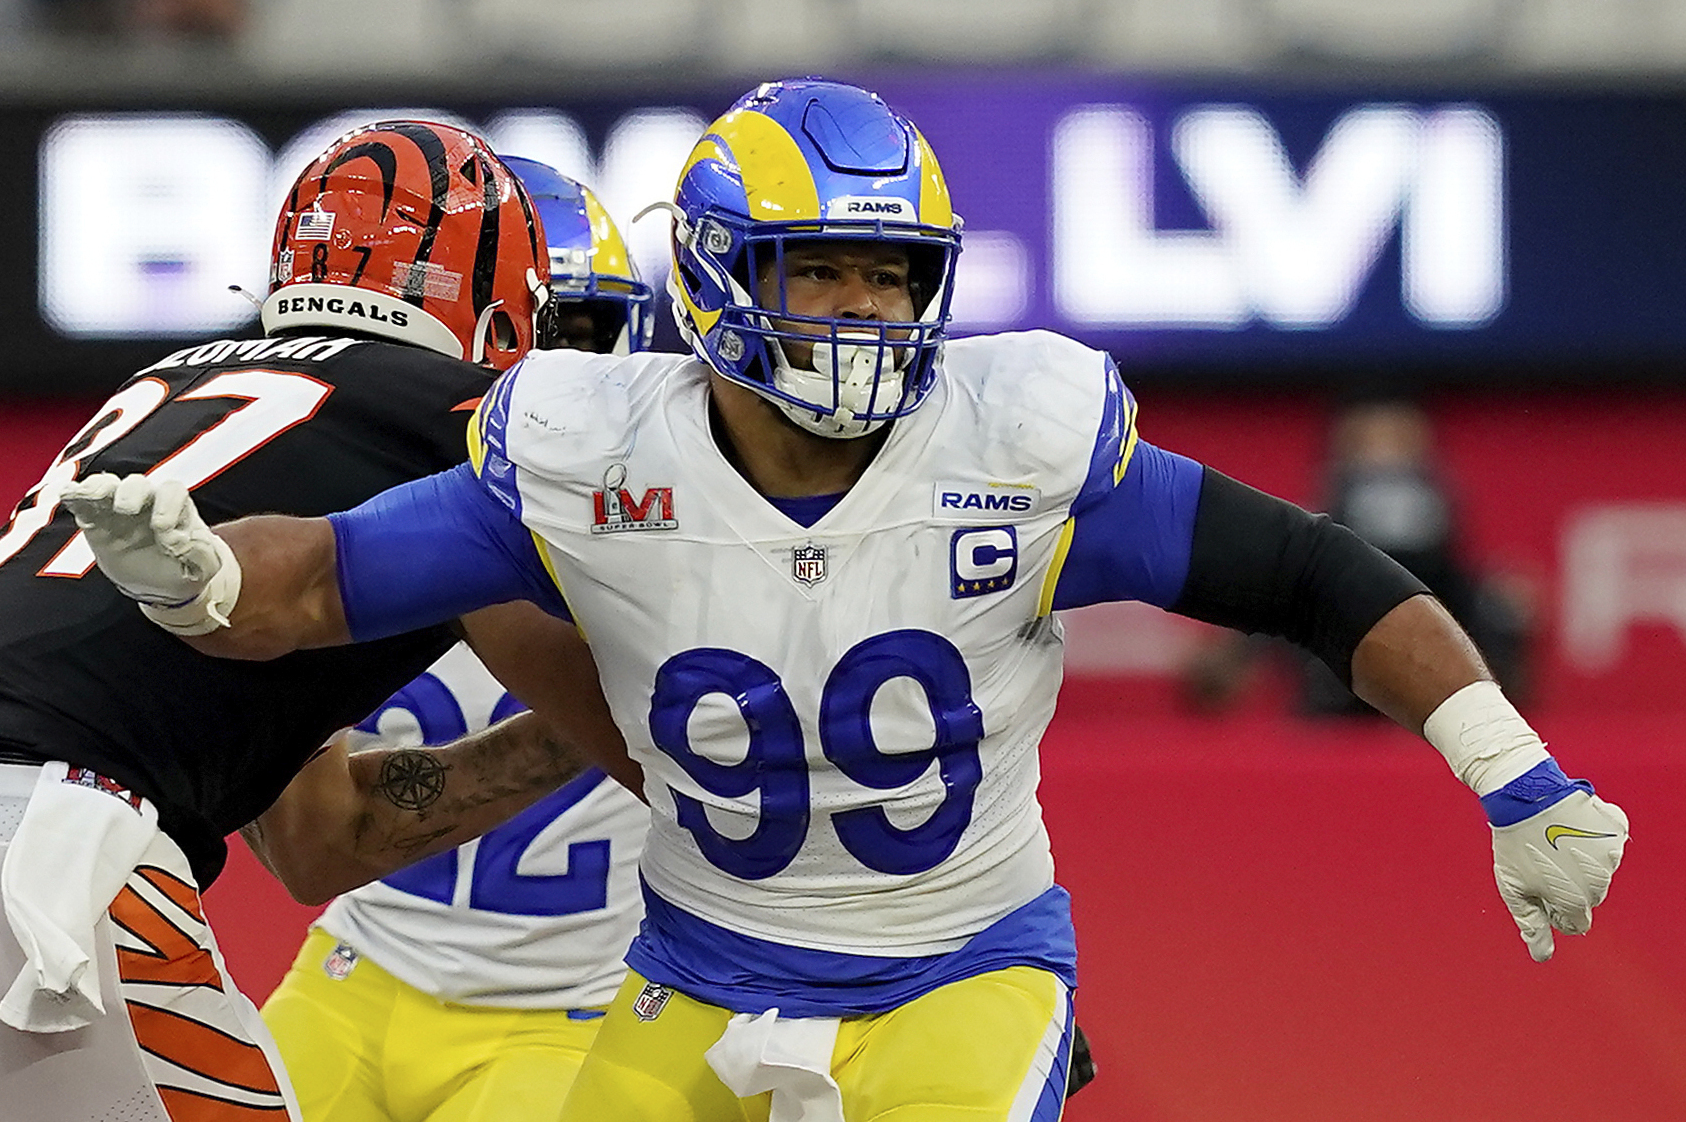 Rams News: Aaron Donald and Greg Gaines grades during the Wildcard